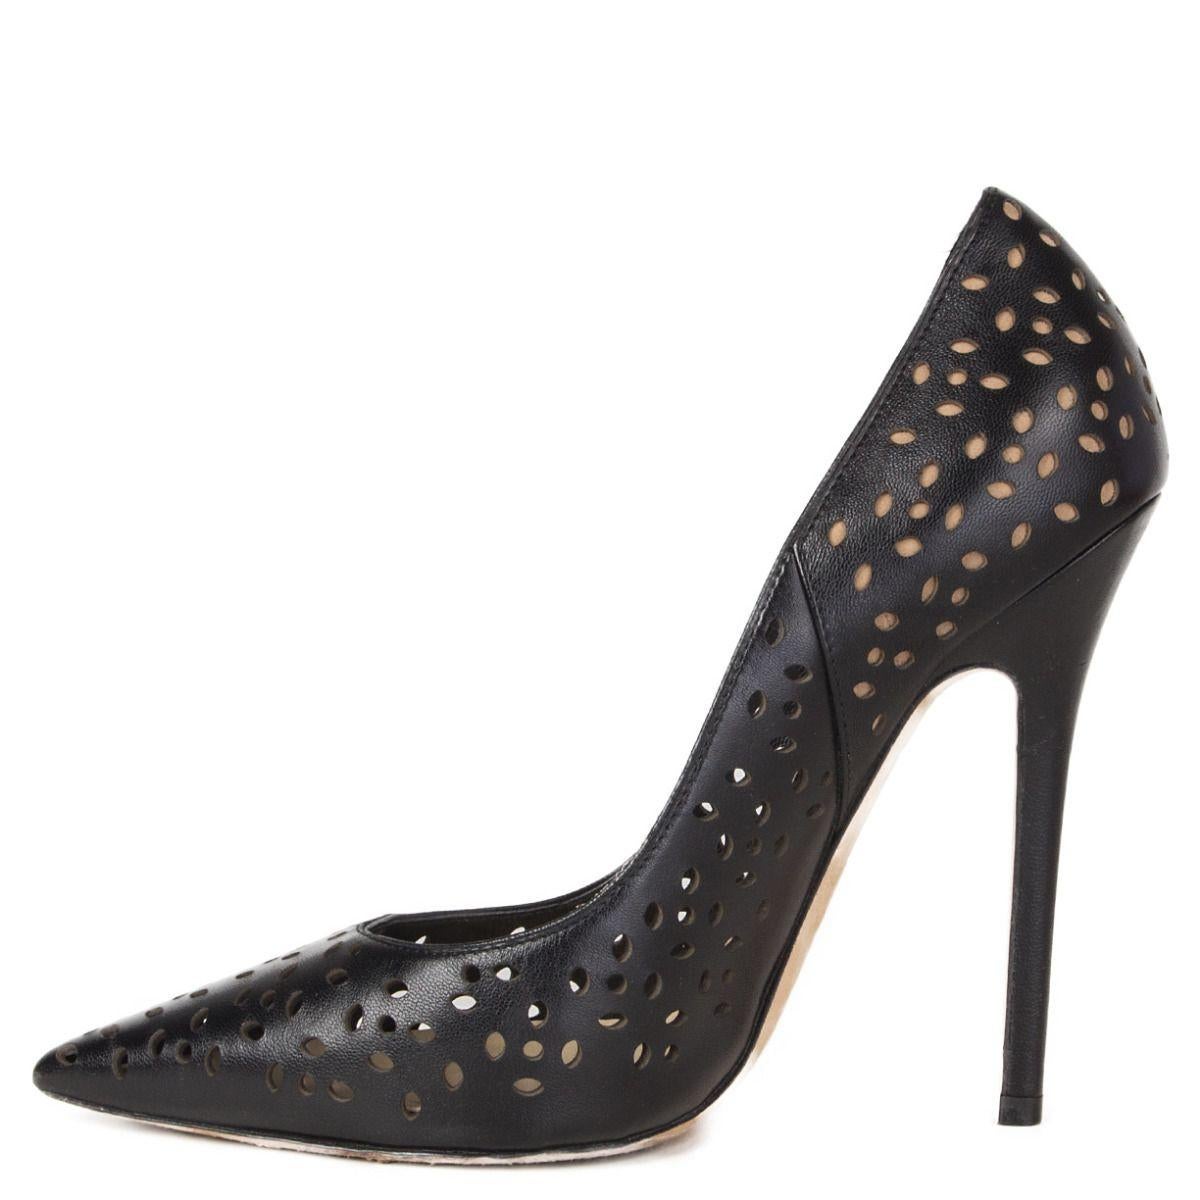 Black JIMMY CHOO black leather ANOUK Perforated Pumps Shoes 36 For Sale